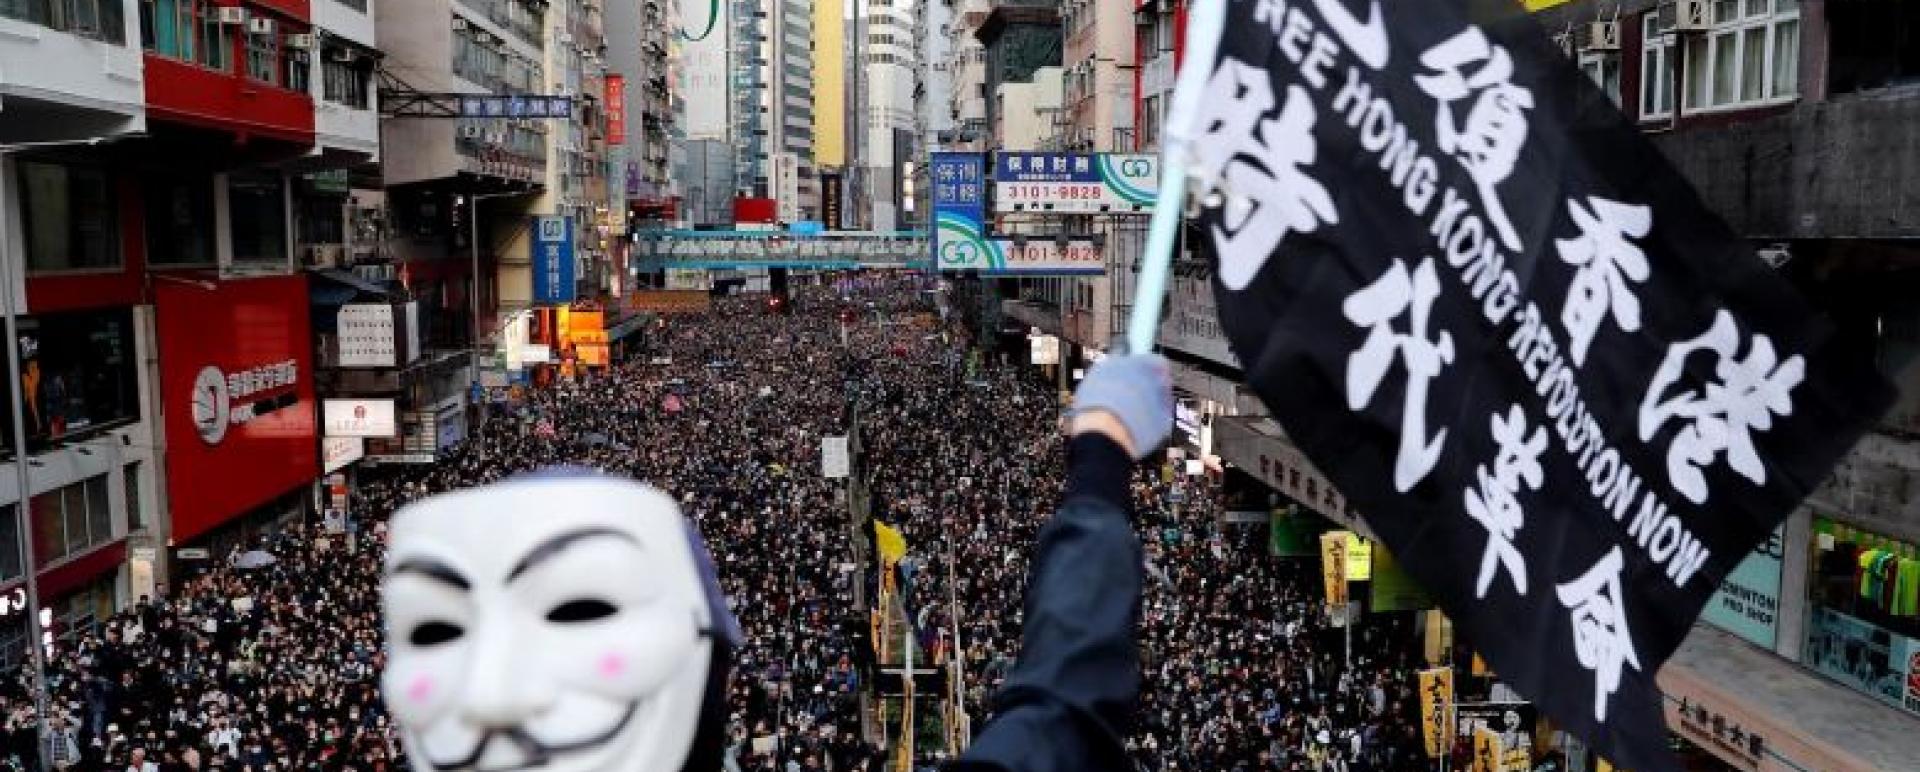 People marching in Hong Kong on Dec 8, 2019. The rally went smoothly but tensions notched up at night when hundreds of protesters in face masks and helmets started building barricades in areas such as Central and Causeway Bay to slow down riot police stationed metres away.PHOTO: REUTERS